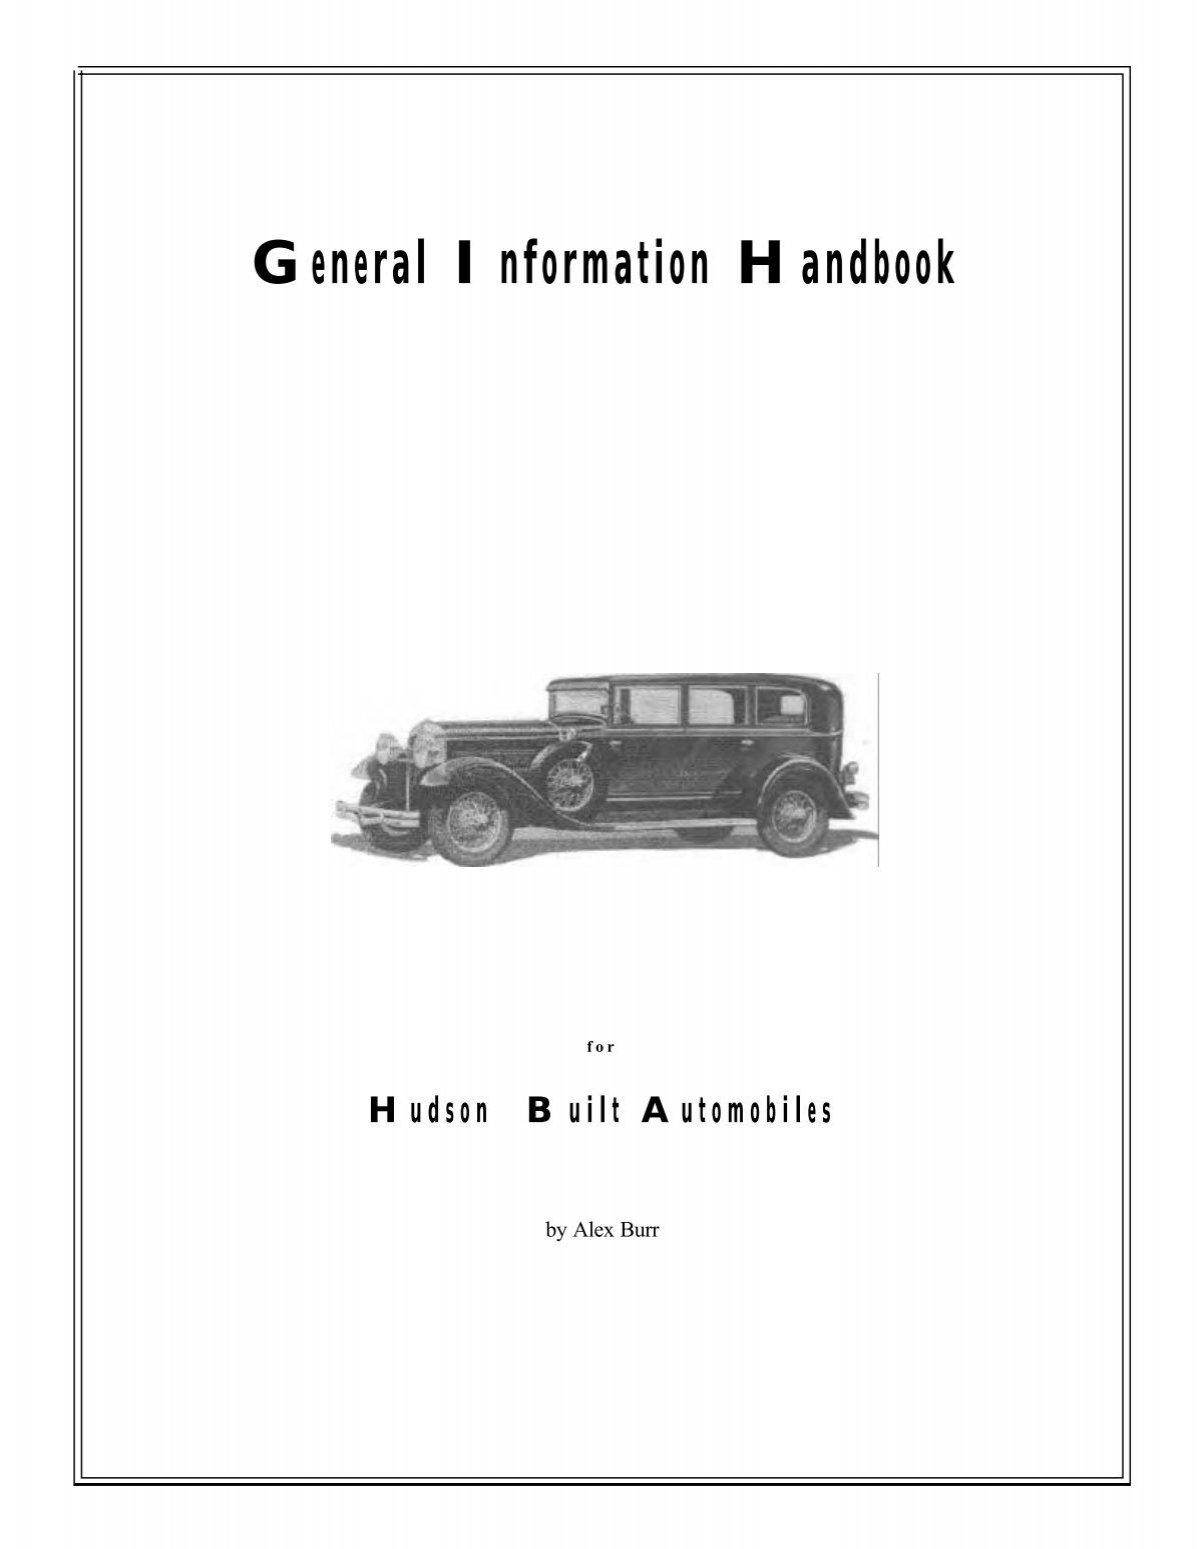 The General Information Handbook for Hudson Automobiles by Alex